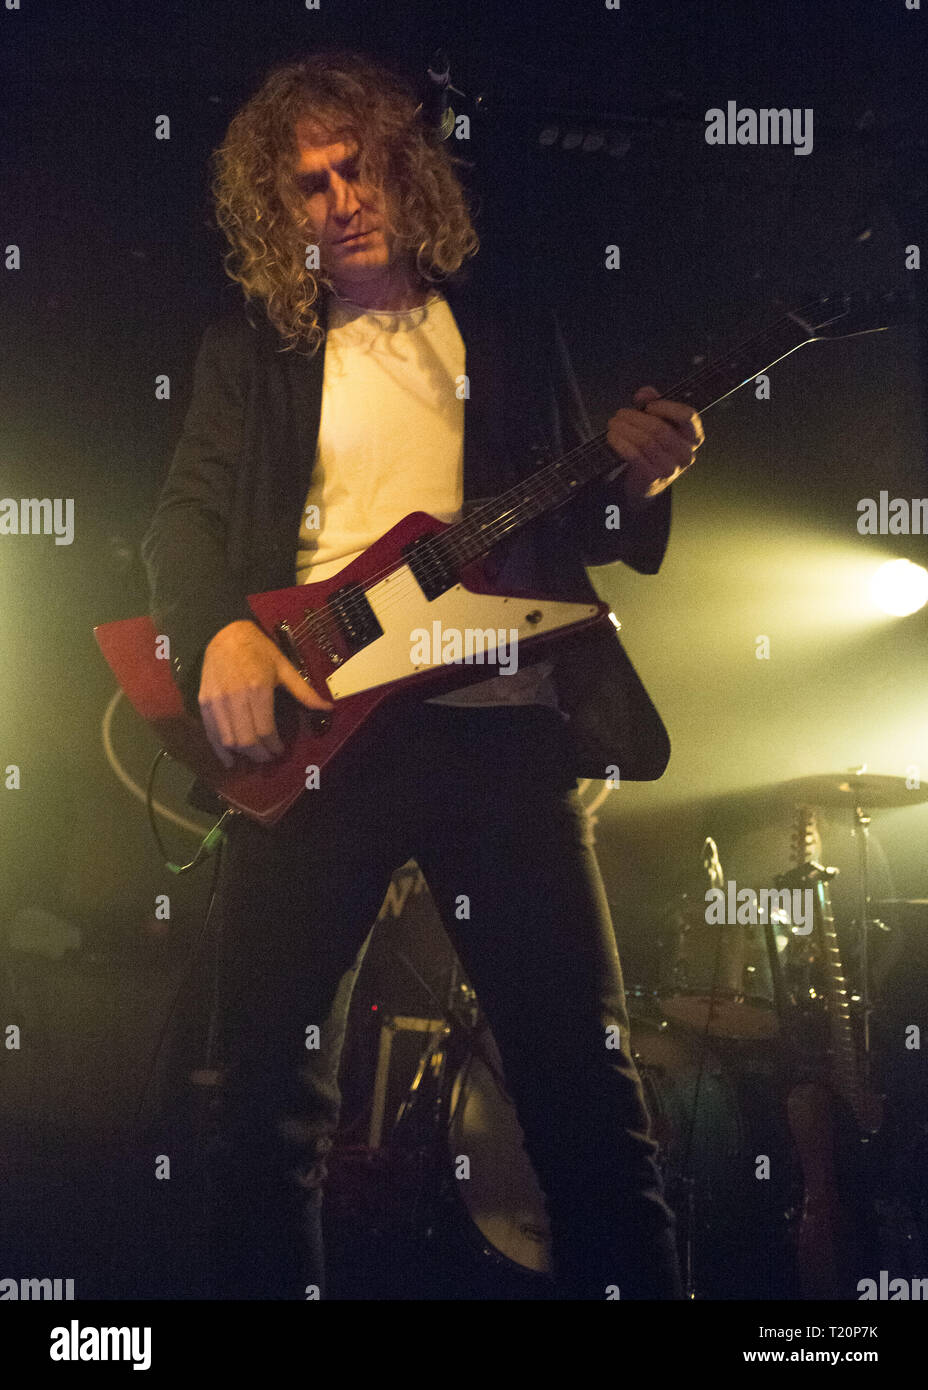 Killers Guitarist, Dave Keuning performing in Glasgow to a packed crowd at the renowned King Tuts Wah Wah Hut in Glasgow. Stock Photo